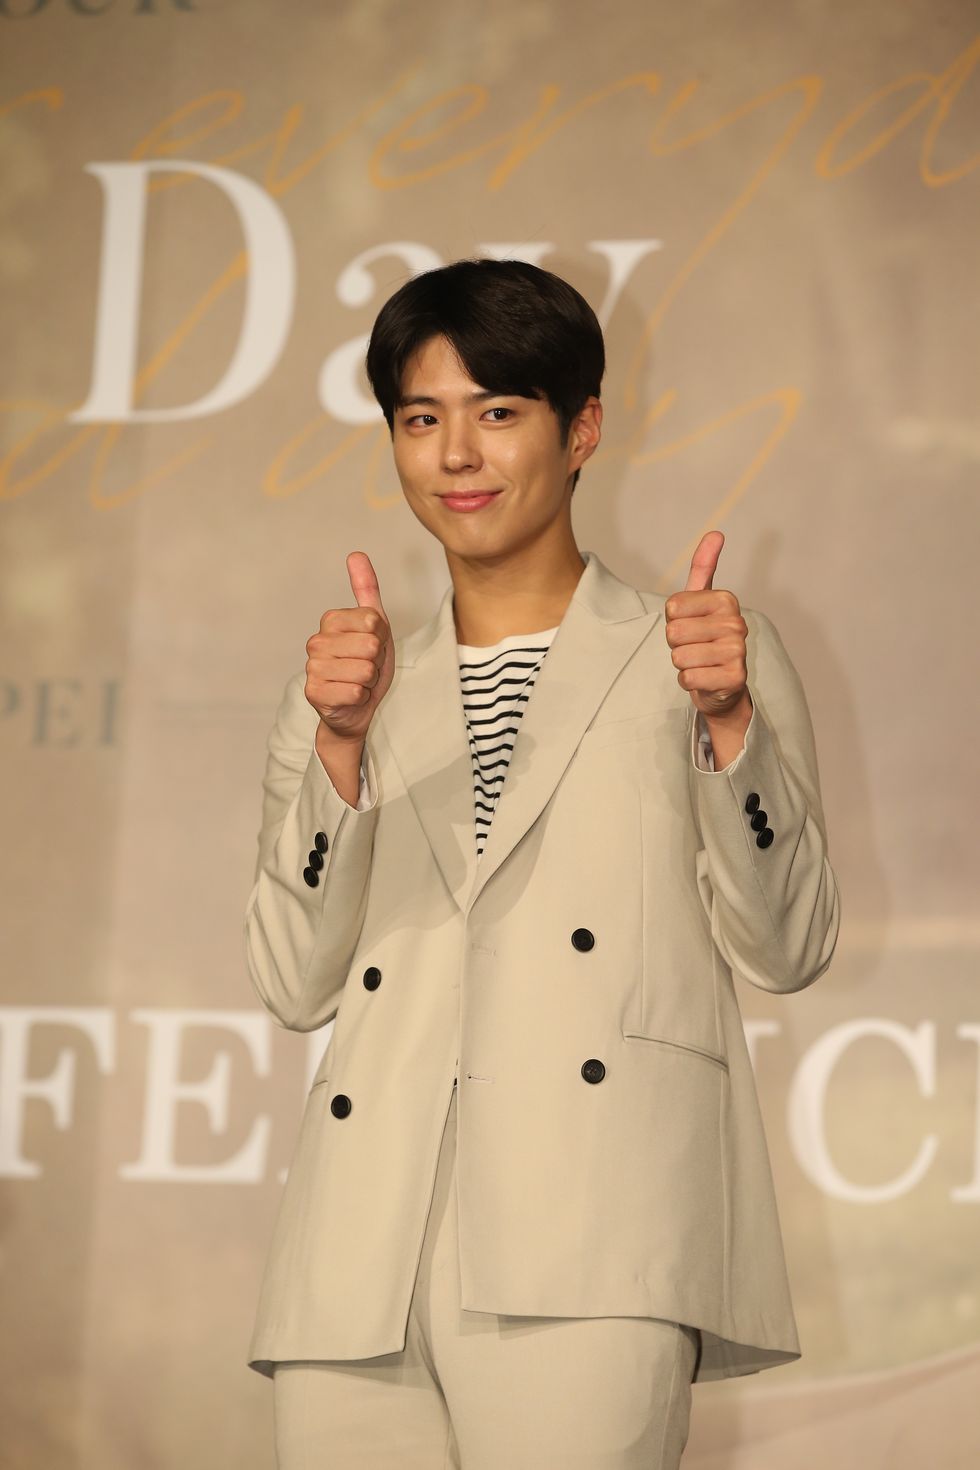 park bo gum attends fans meeting in taipei